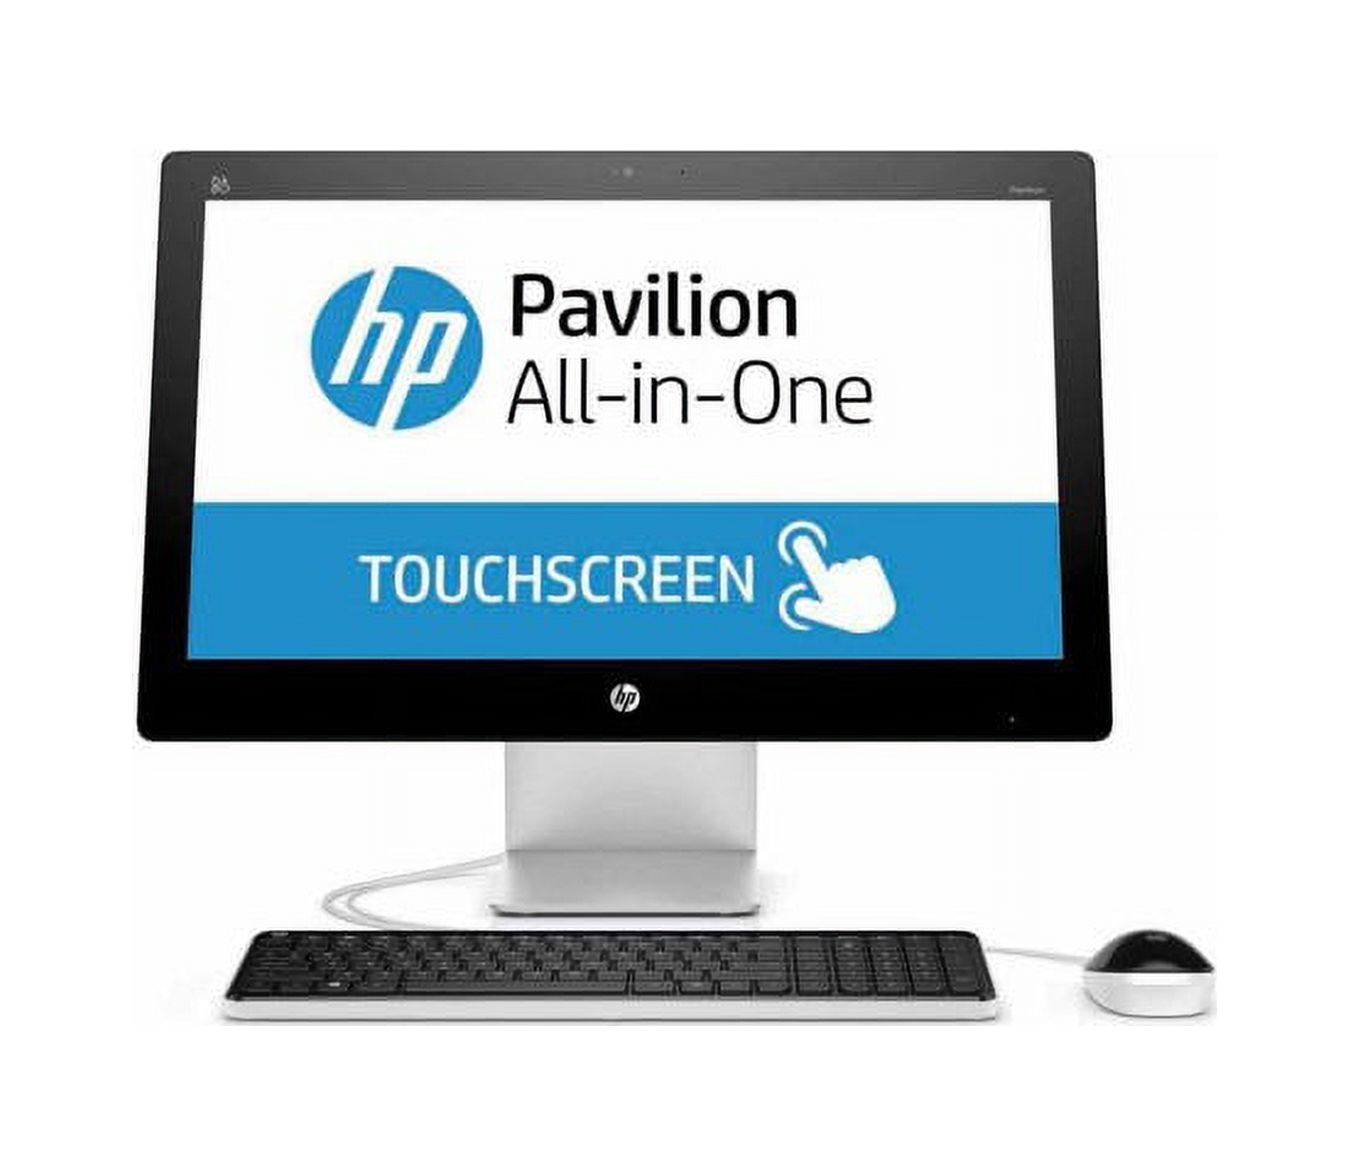 Restored HP 22-a113w Pavilion 21.5" FHD Touchscreen Pentium G3260T 2.9GHz 4GB RAM 1TB HDD Win 10 Home White (Refurbished) - image 1 of 4